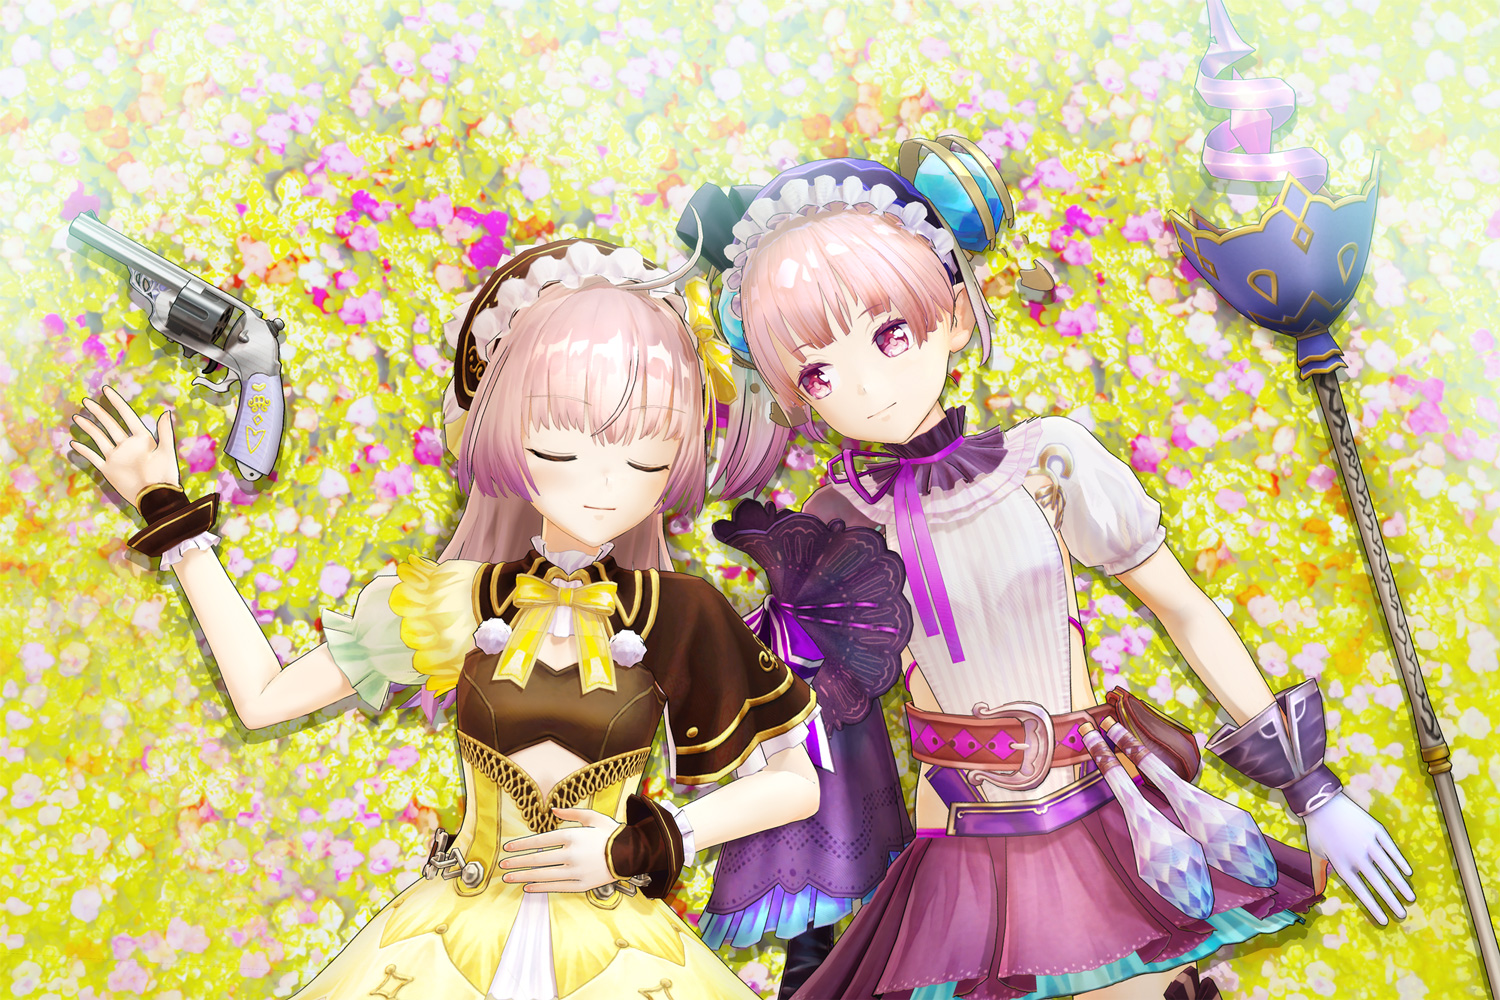 Atelier Lydie & Suelle: The Alchemists and the Mysterious Paintings Review – Saccharine